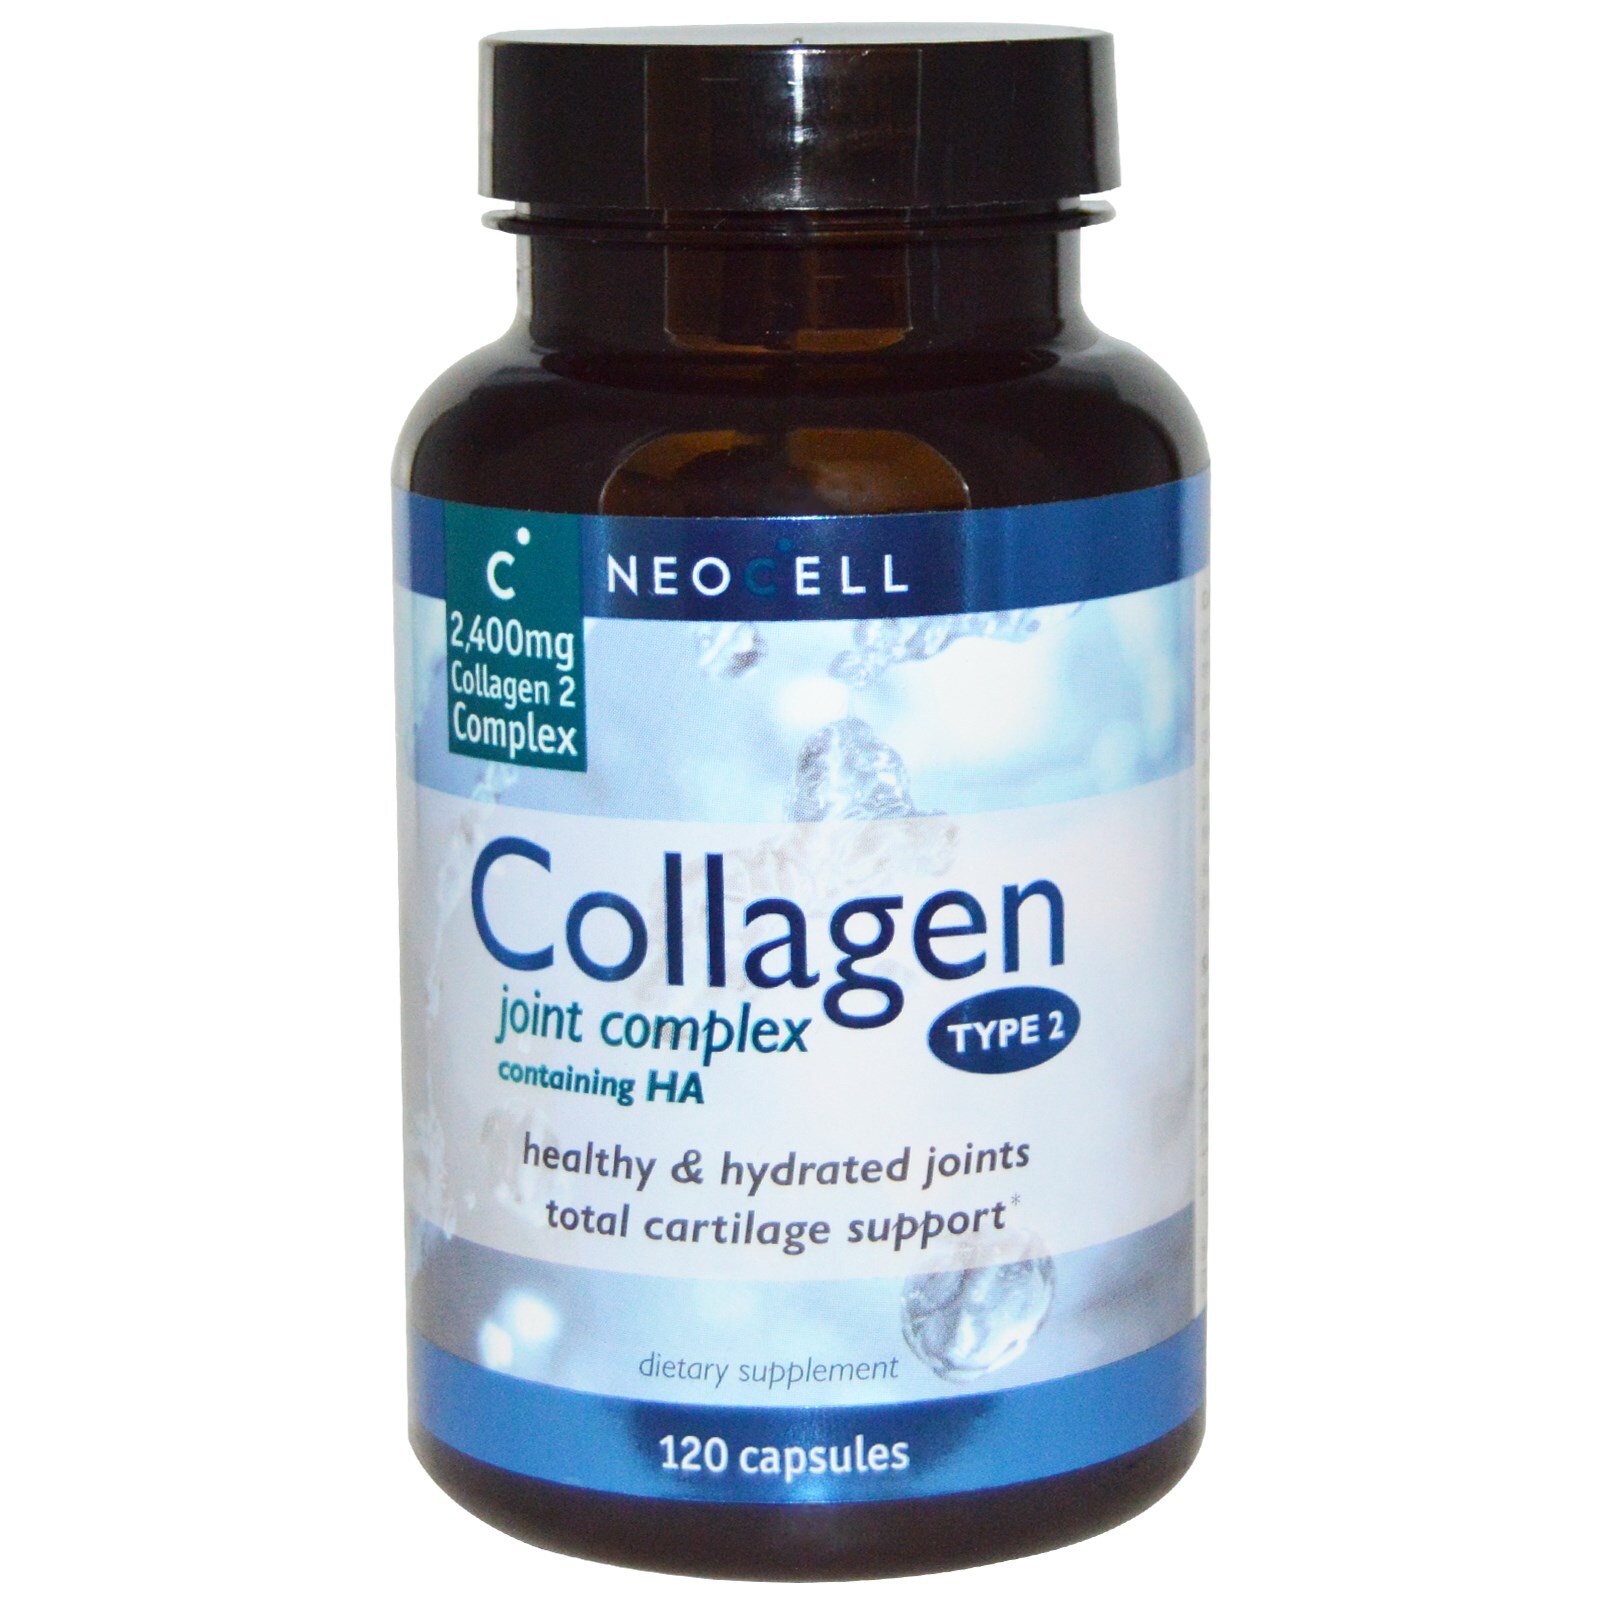 Viên uống bổ khớp NeoCell Collagen type 2 + HA Joint Complex